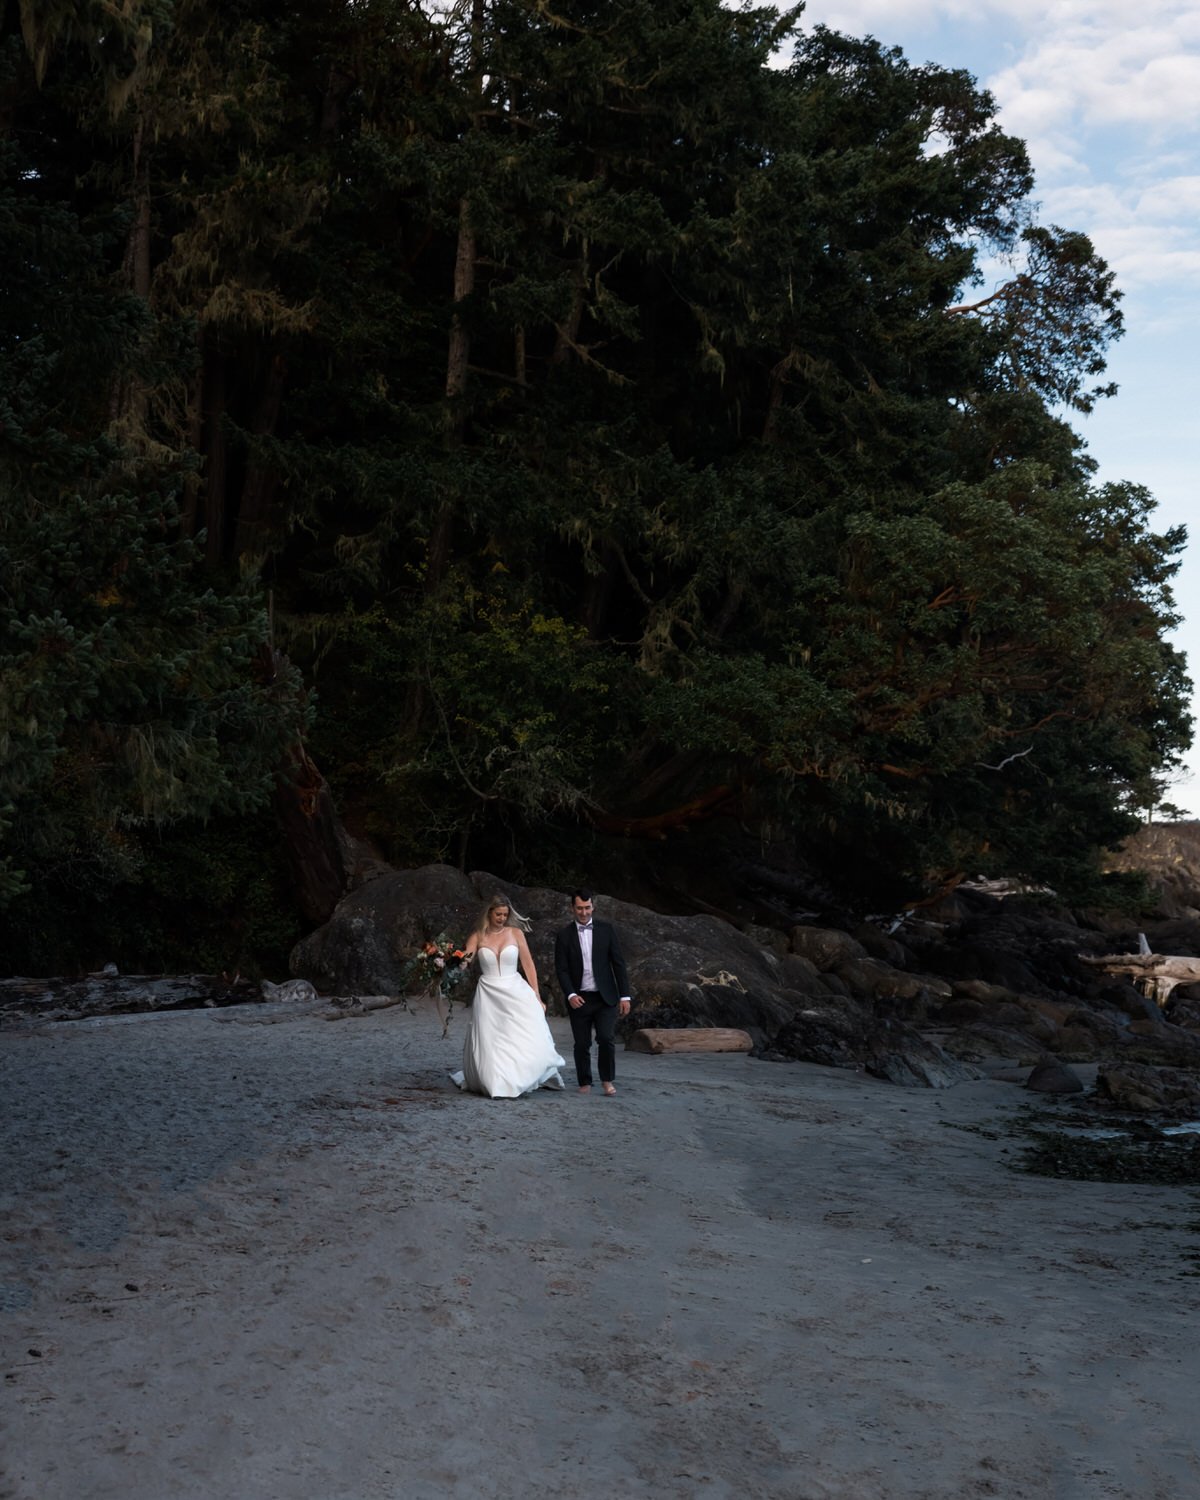 Vancouver Island Adventure Elopement and Small Wedding Photographer - Allie Knull's Photography-69.jpg